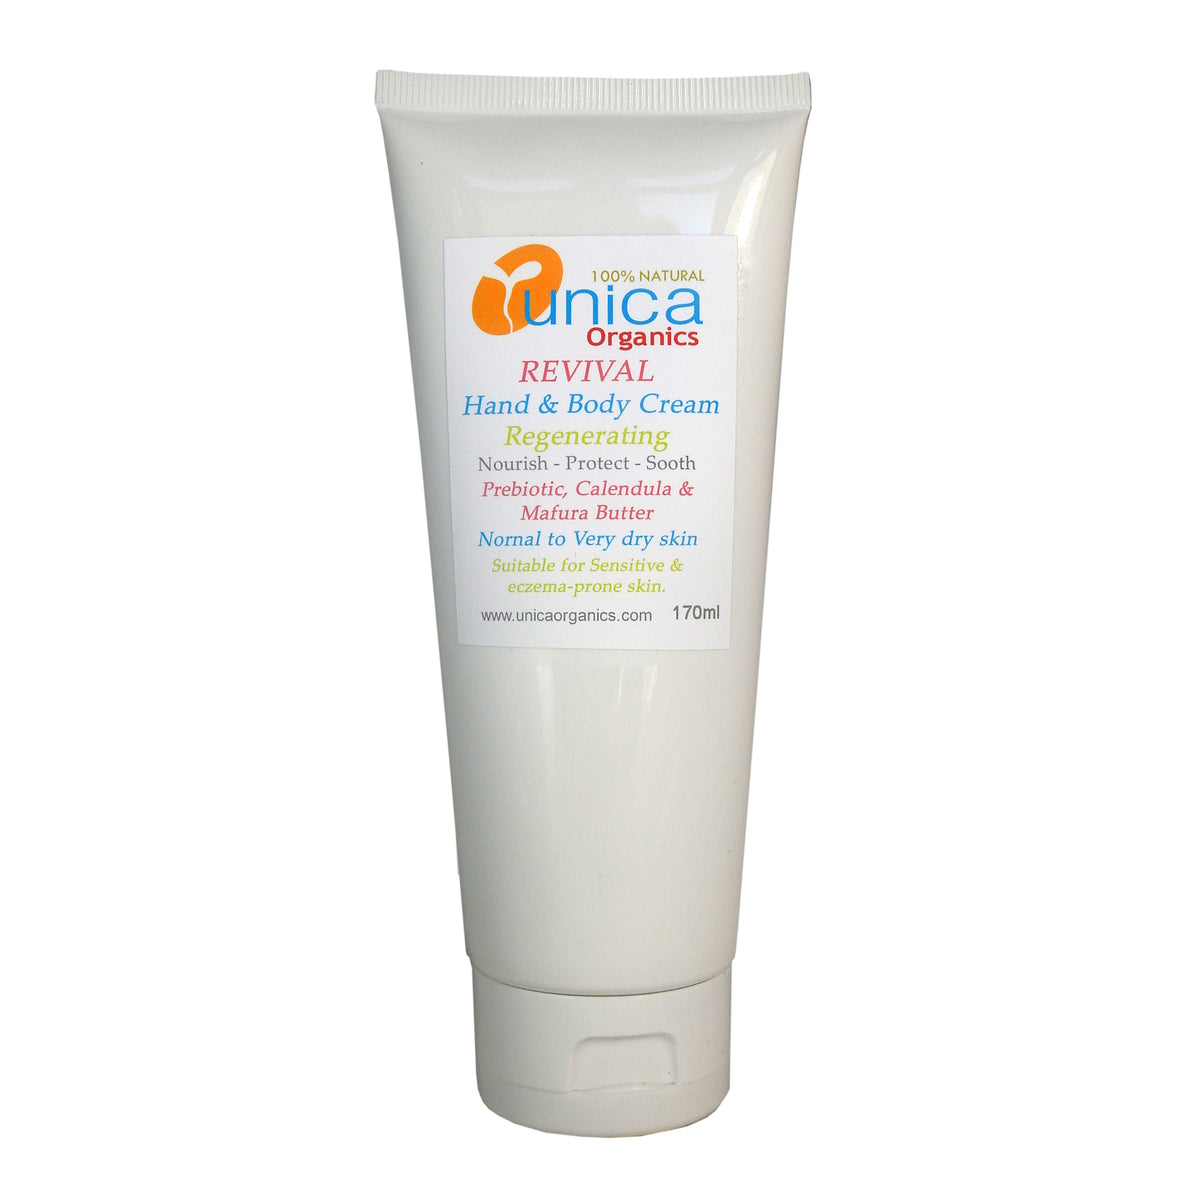 Organic hand and body cream with Prebiotics in white tube container. Suitable for sensitive skin, eczema and psoriasis.